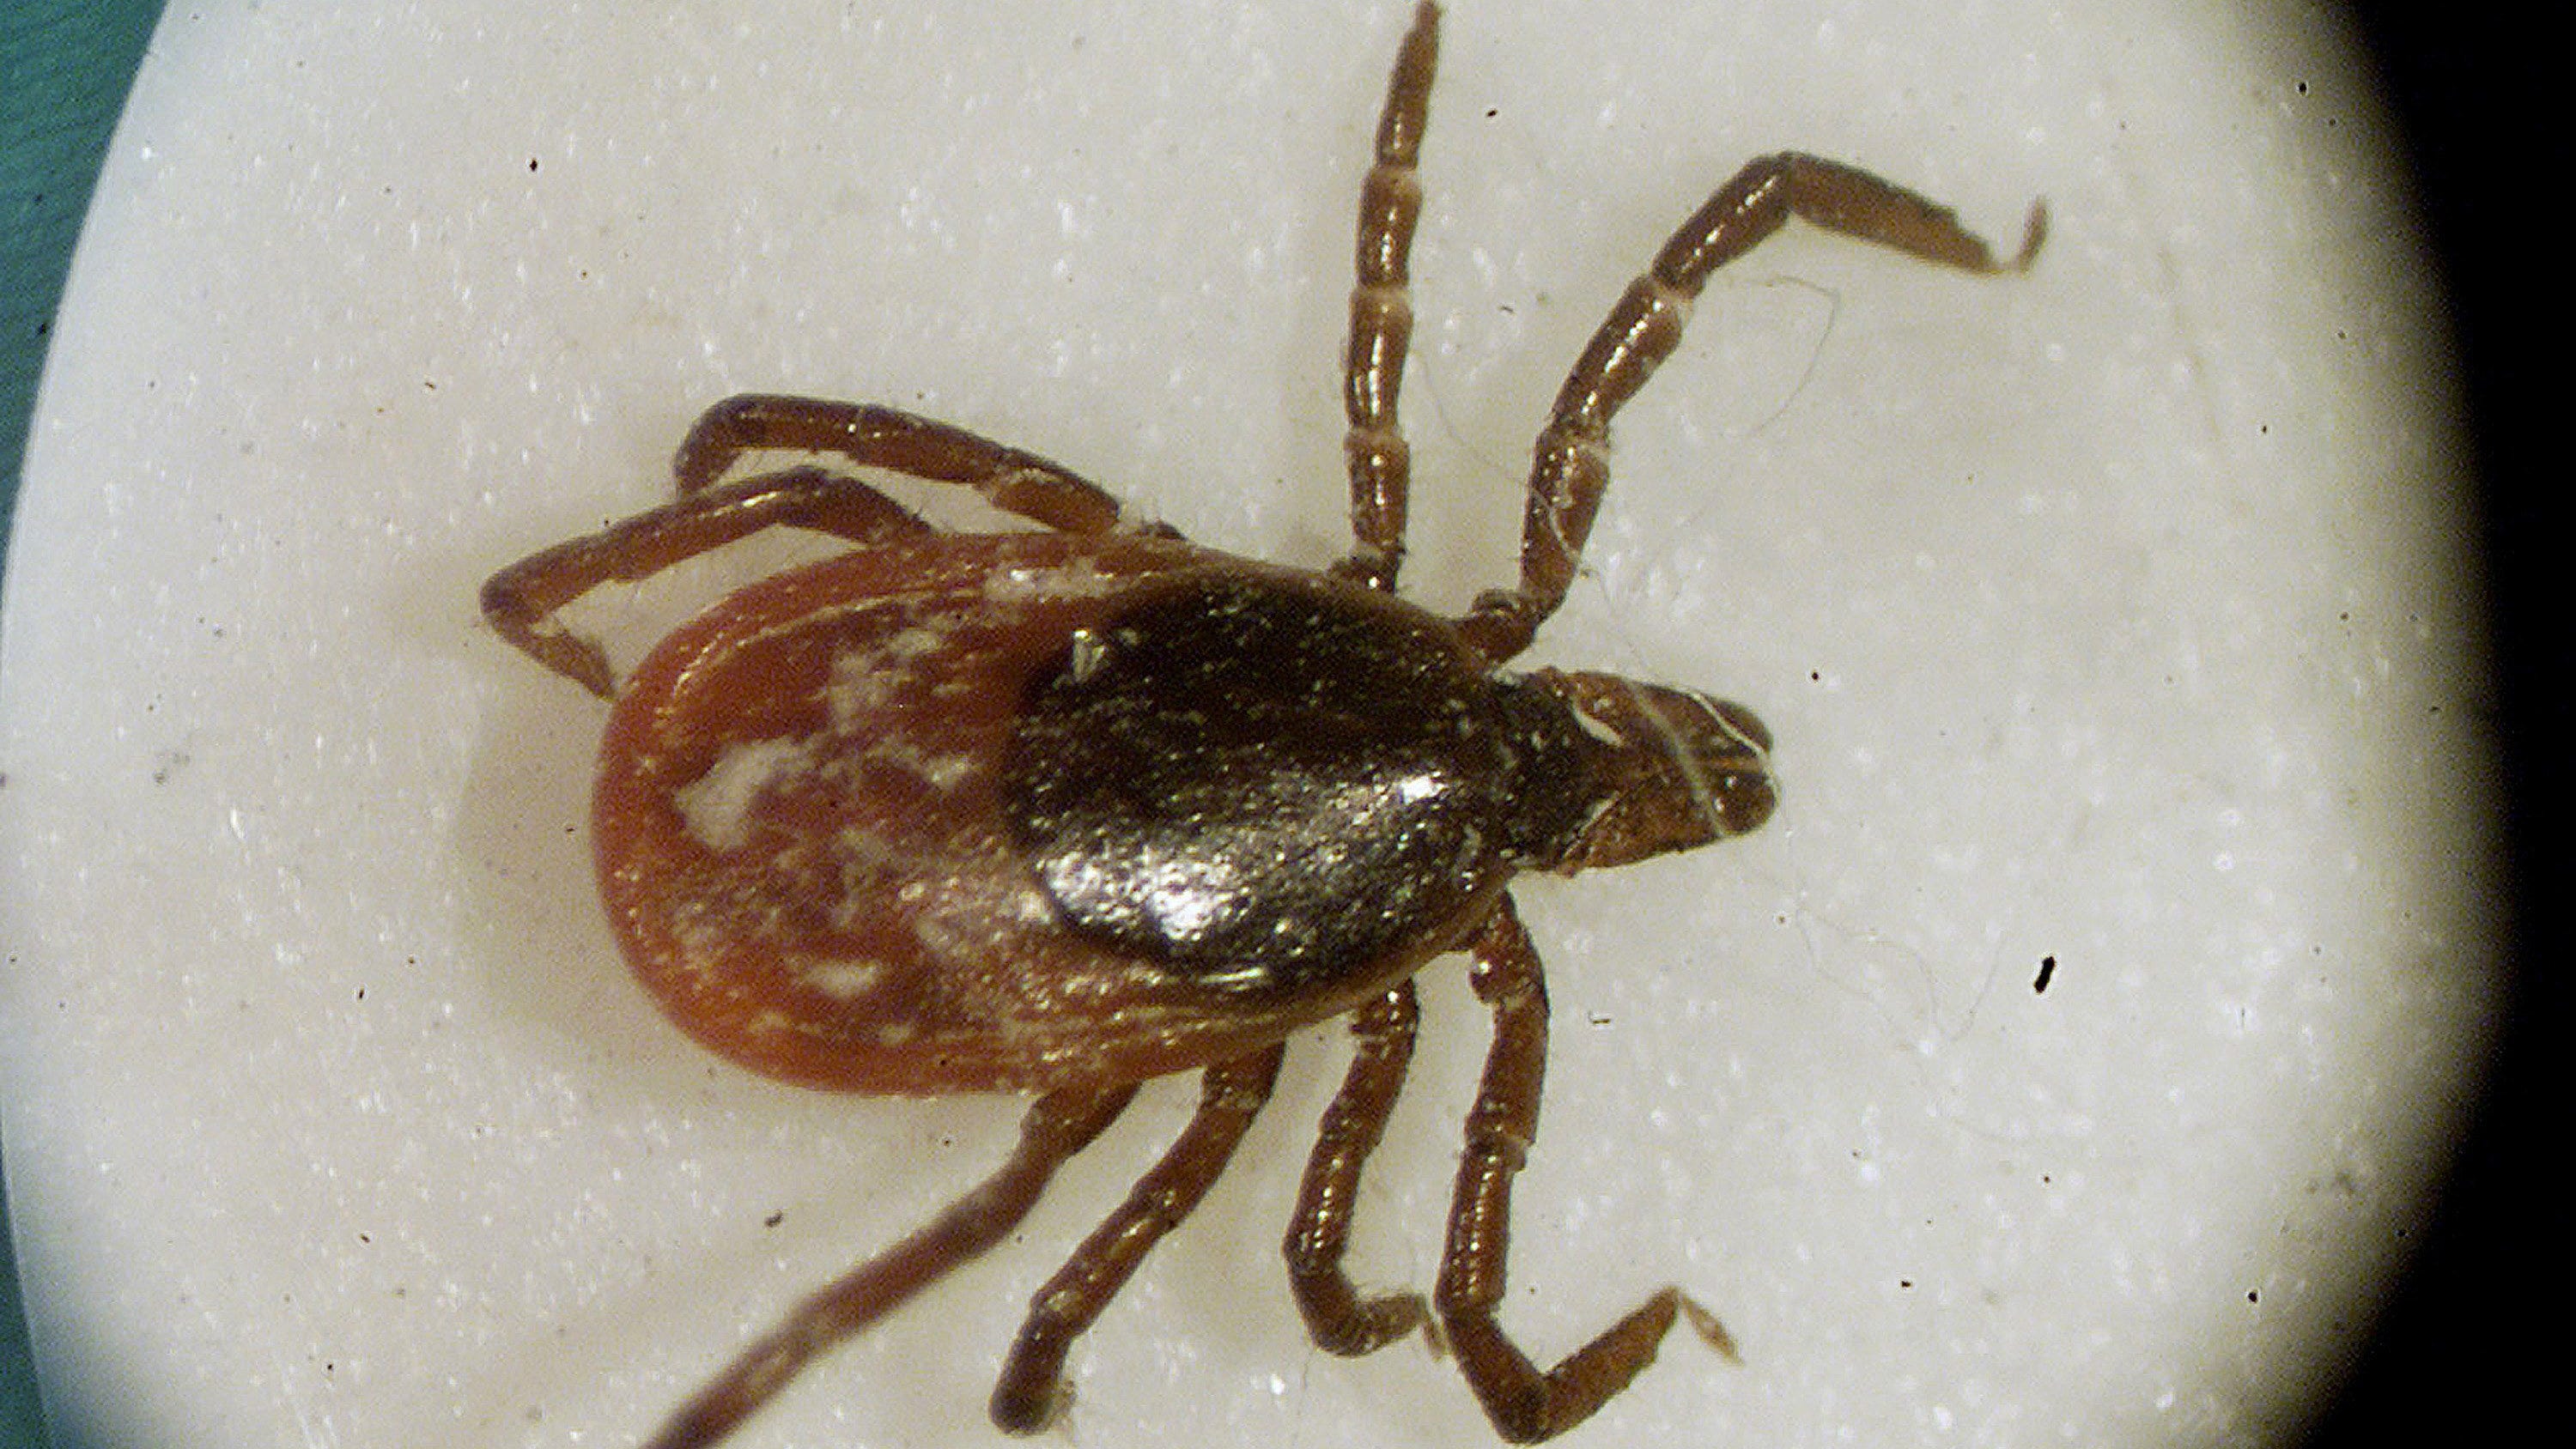 Tick disease with coronavirus-like symptoms is on the rise in Michigan - msnNOW